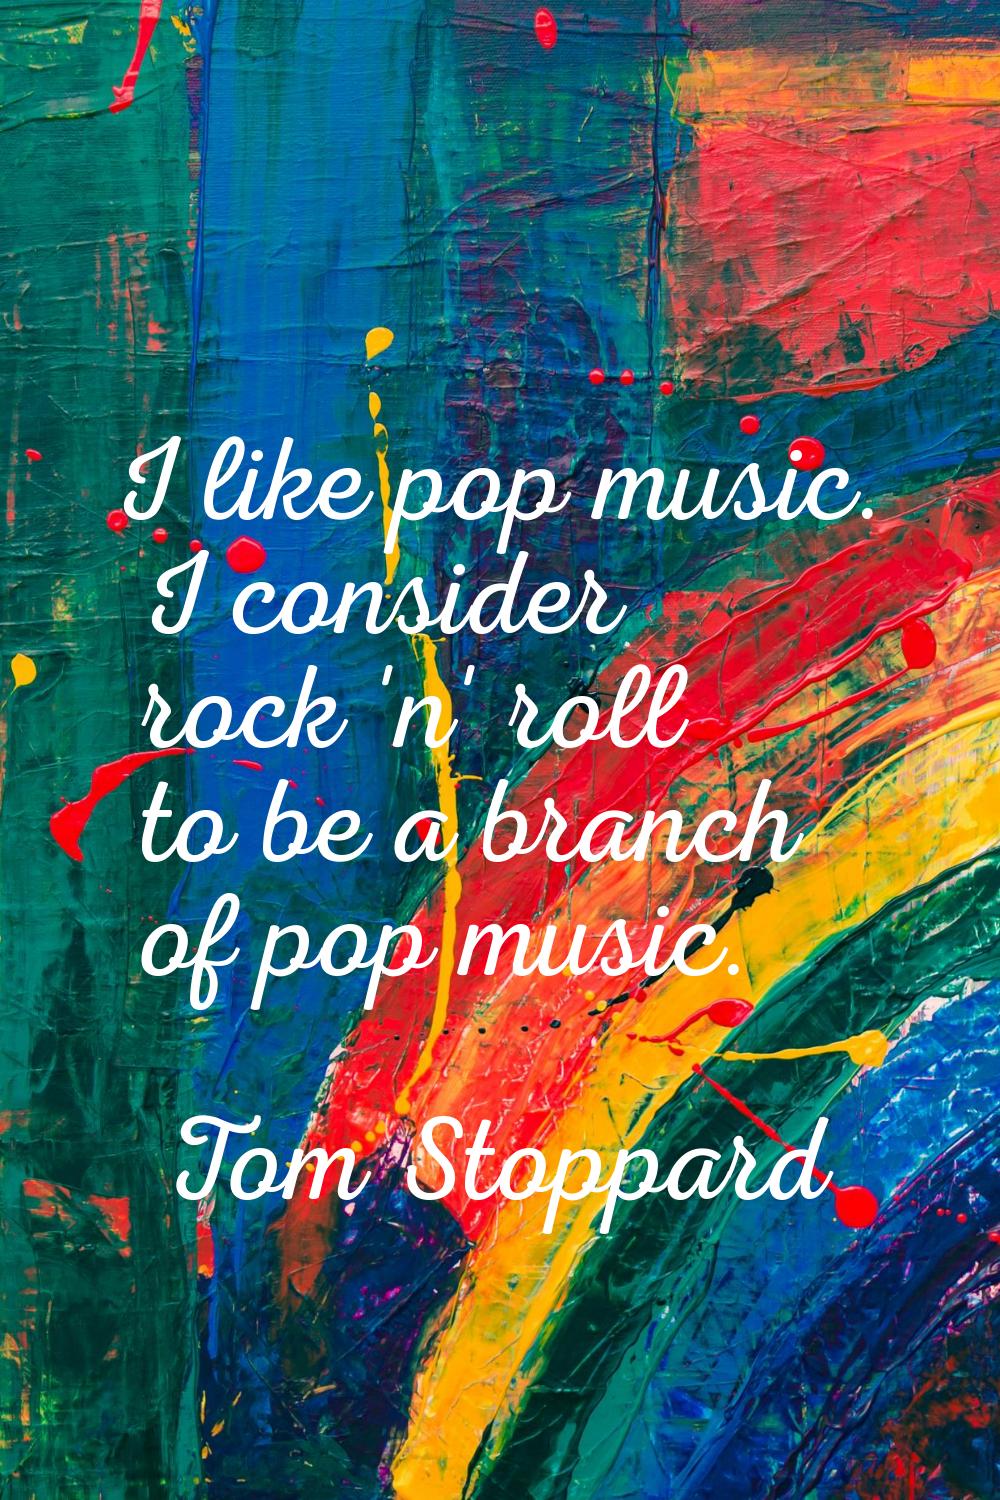 I like pop music. I consider rock 'n' roll to be a branch of pop music.